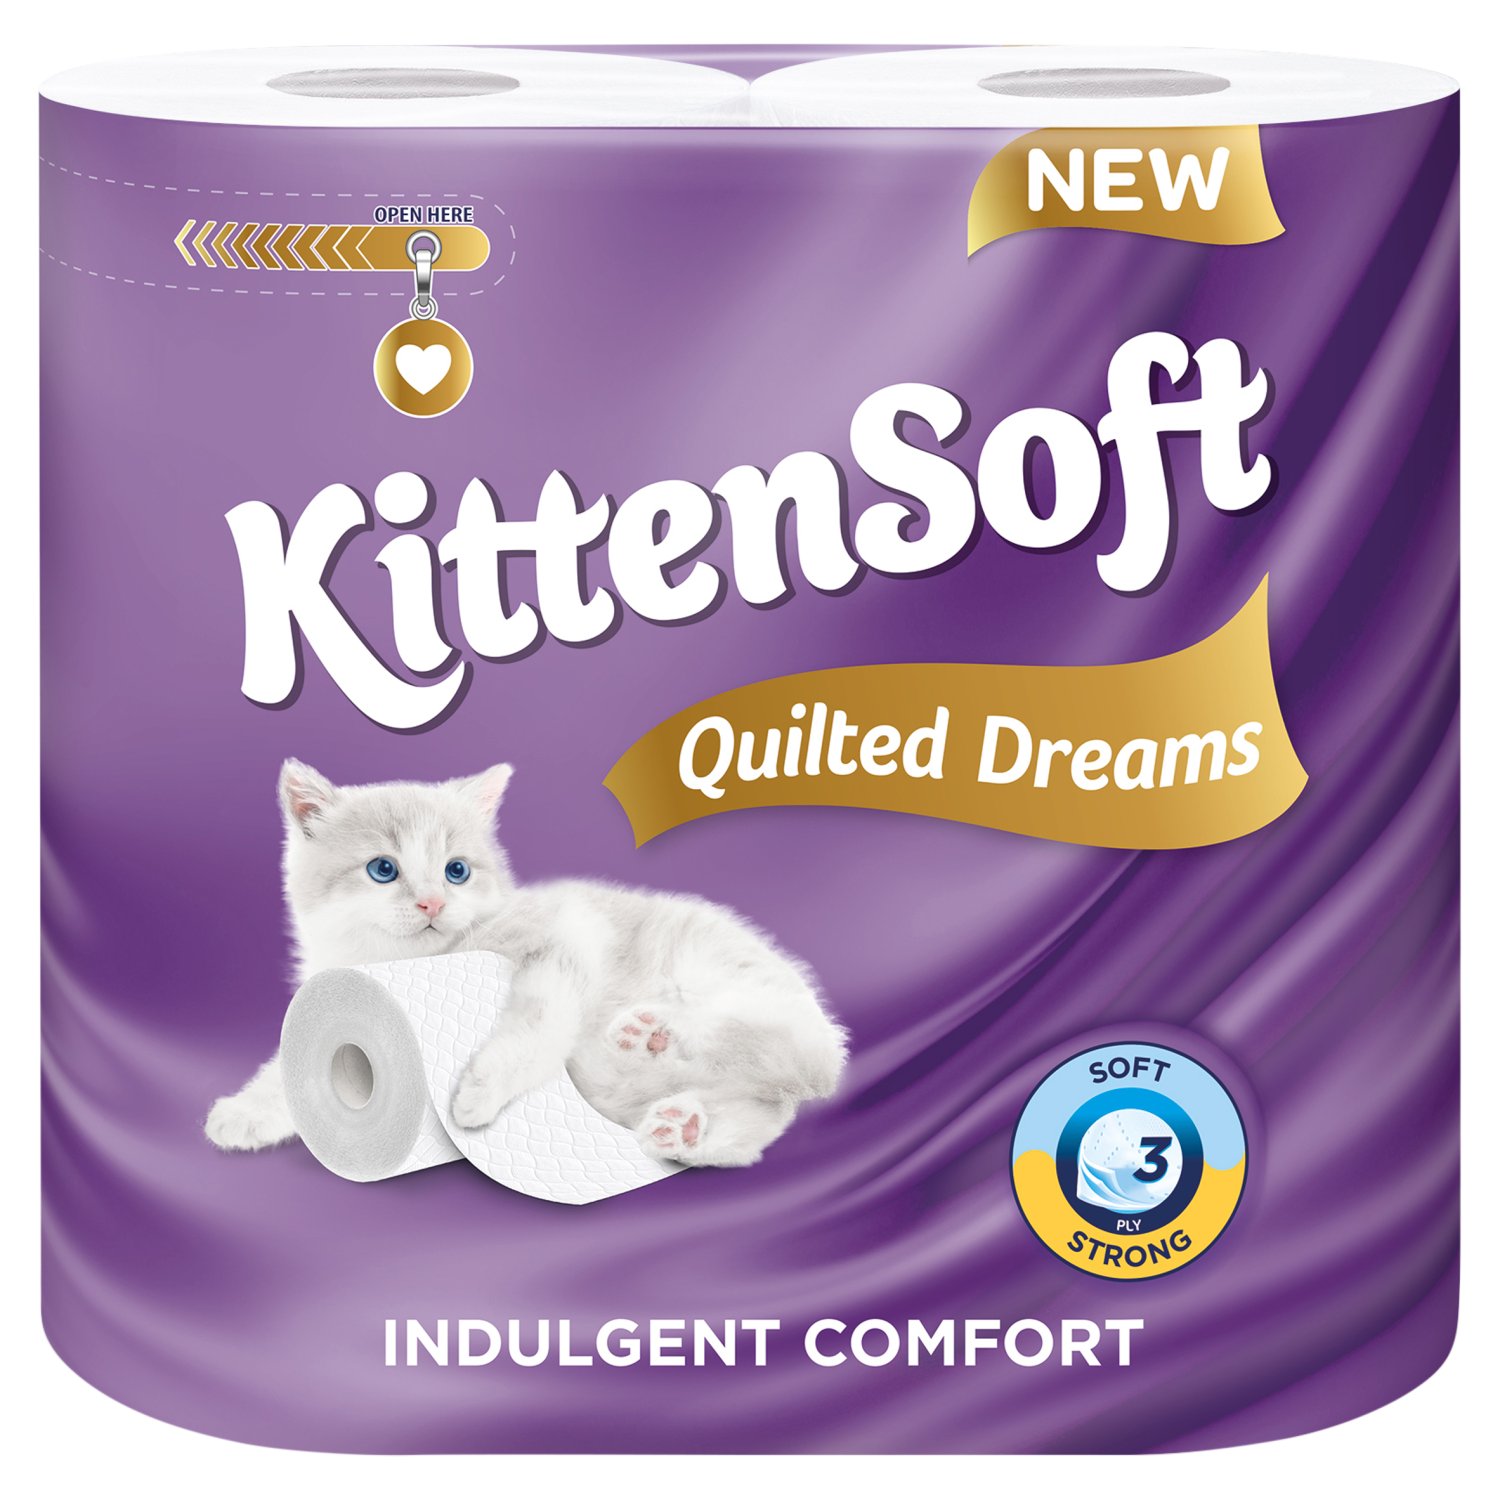 Kittensoft Quilted Dreams (4 Roll)